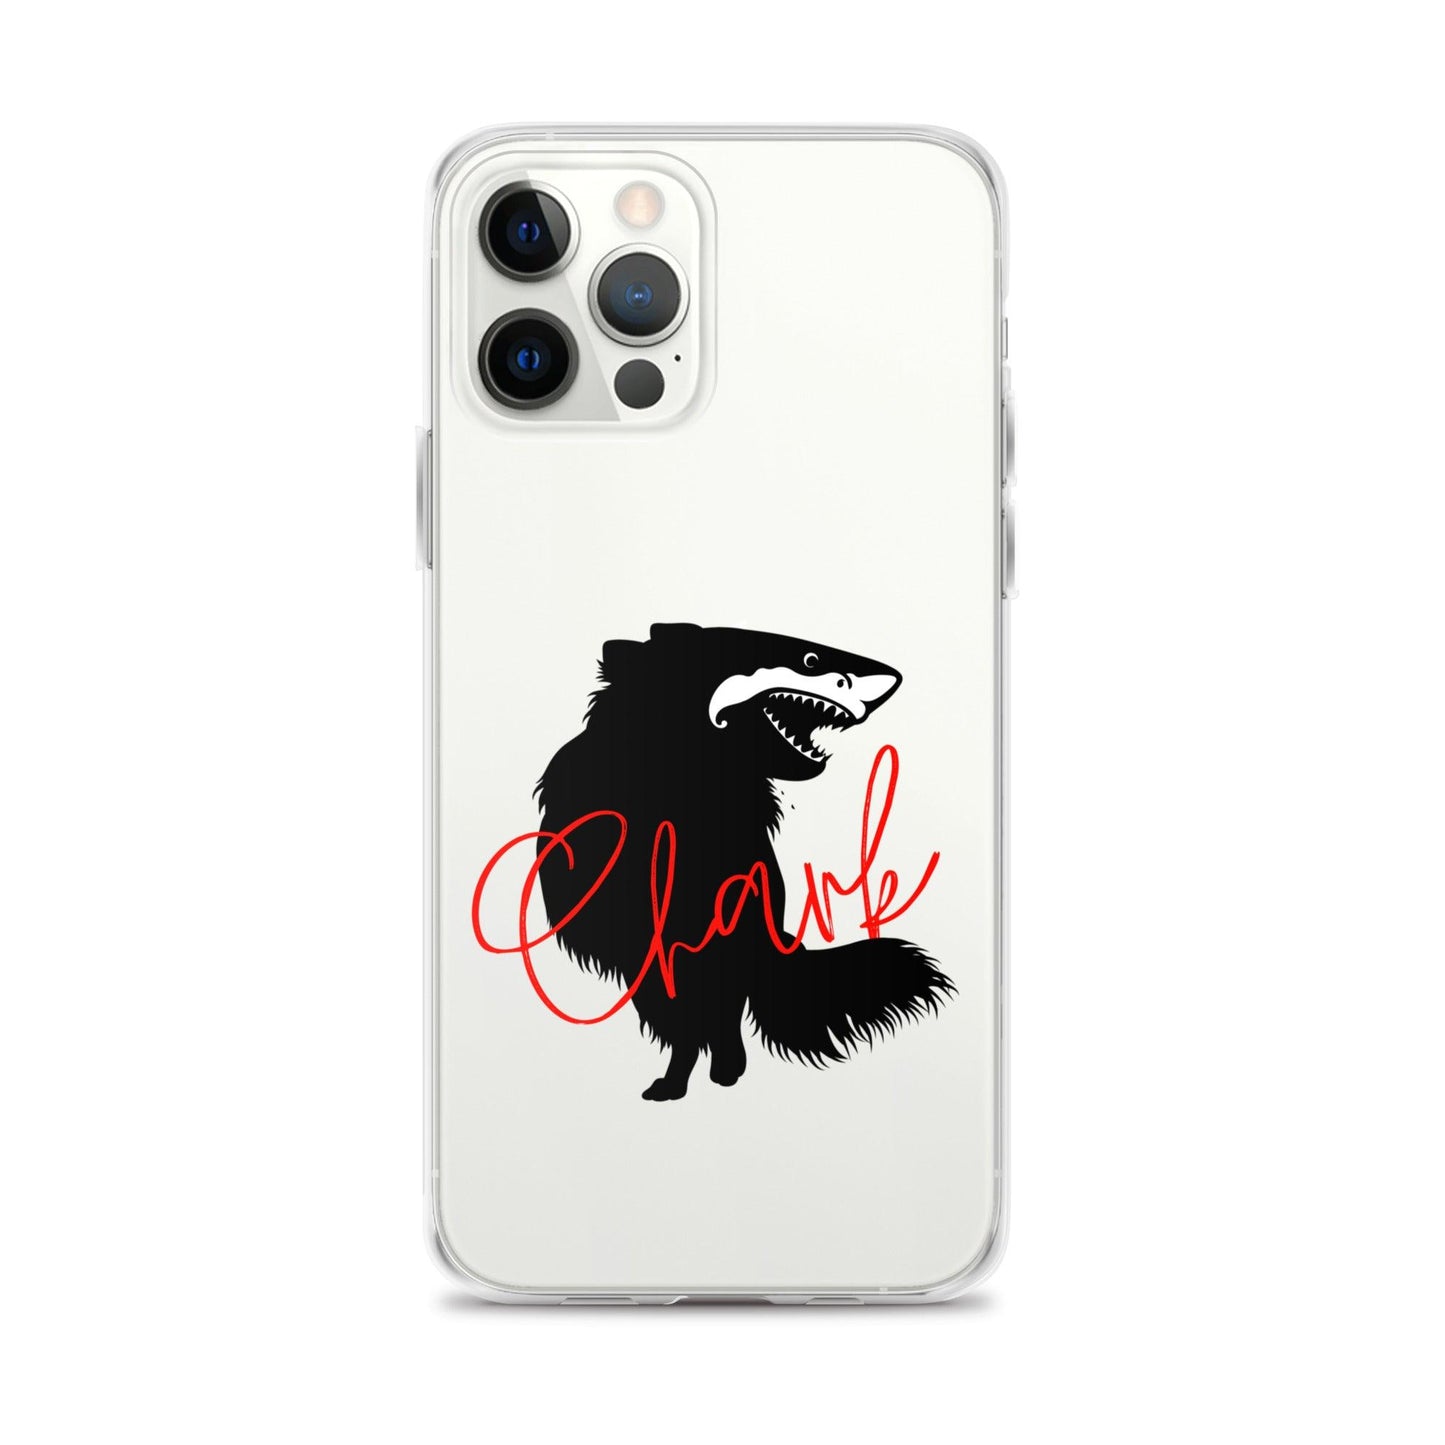 Chihuahua + Shark = Chark Clear iPhone case with the black silhouette of a longhaired chihuahua with the face of a great white shark - mouth open to show off jaws lined with lots of sharp white teeth. The word "Chark" is artfully placed in red cursive font over the image. For trendy chi lovers. iPhone 12 pro max case.